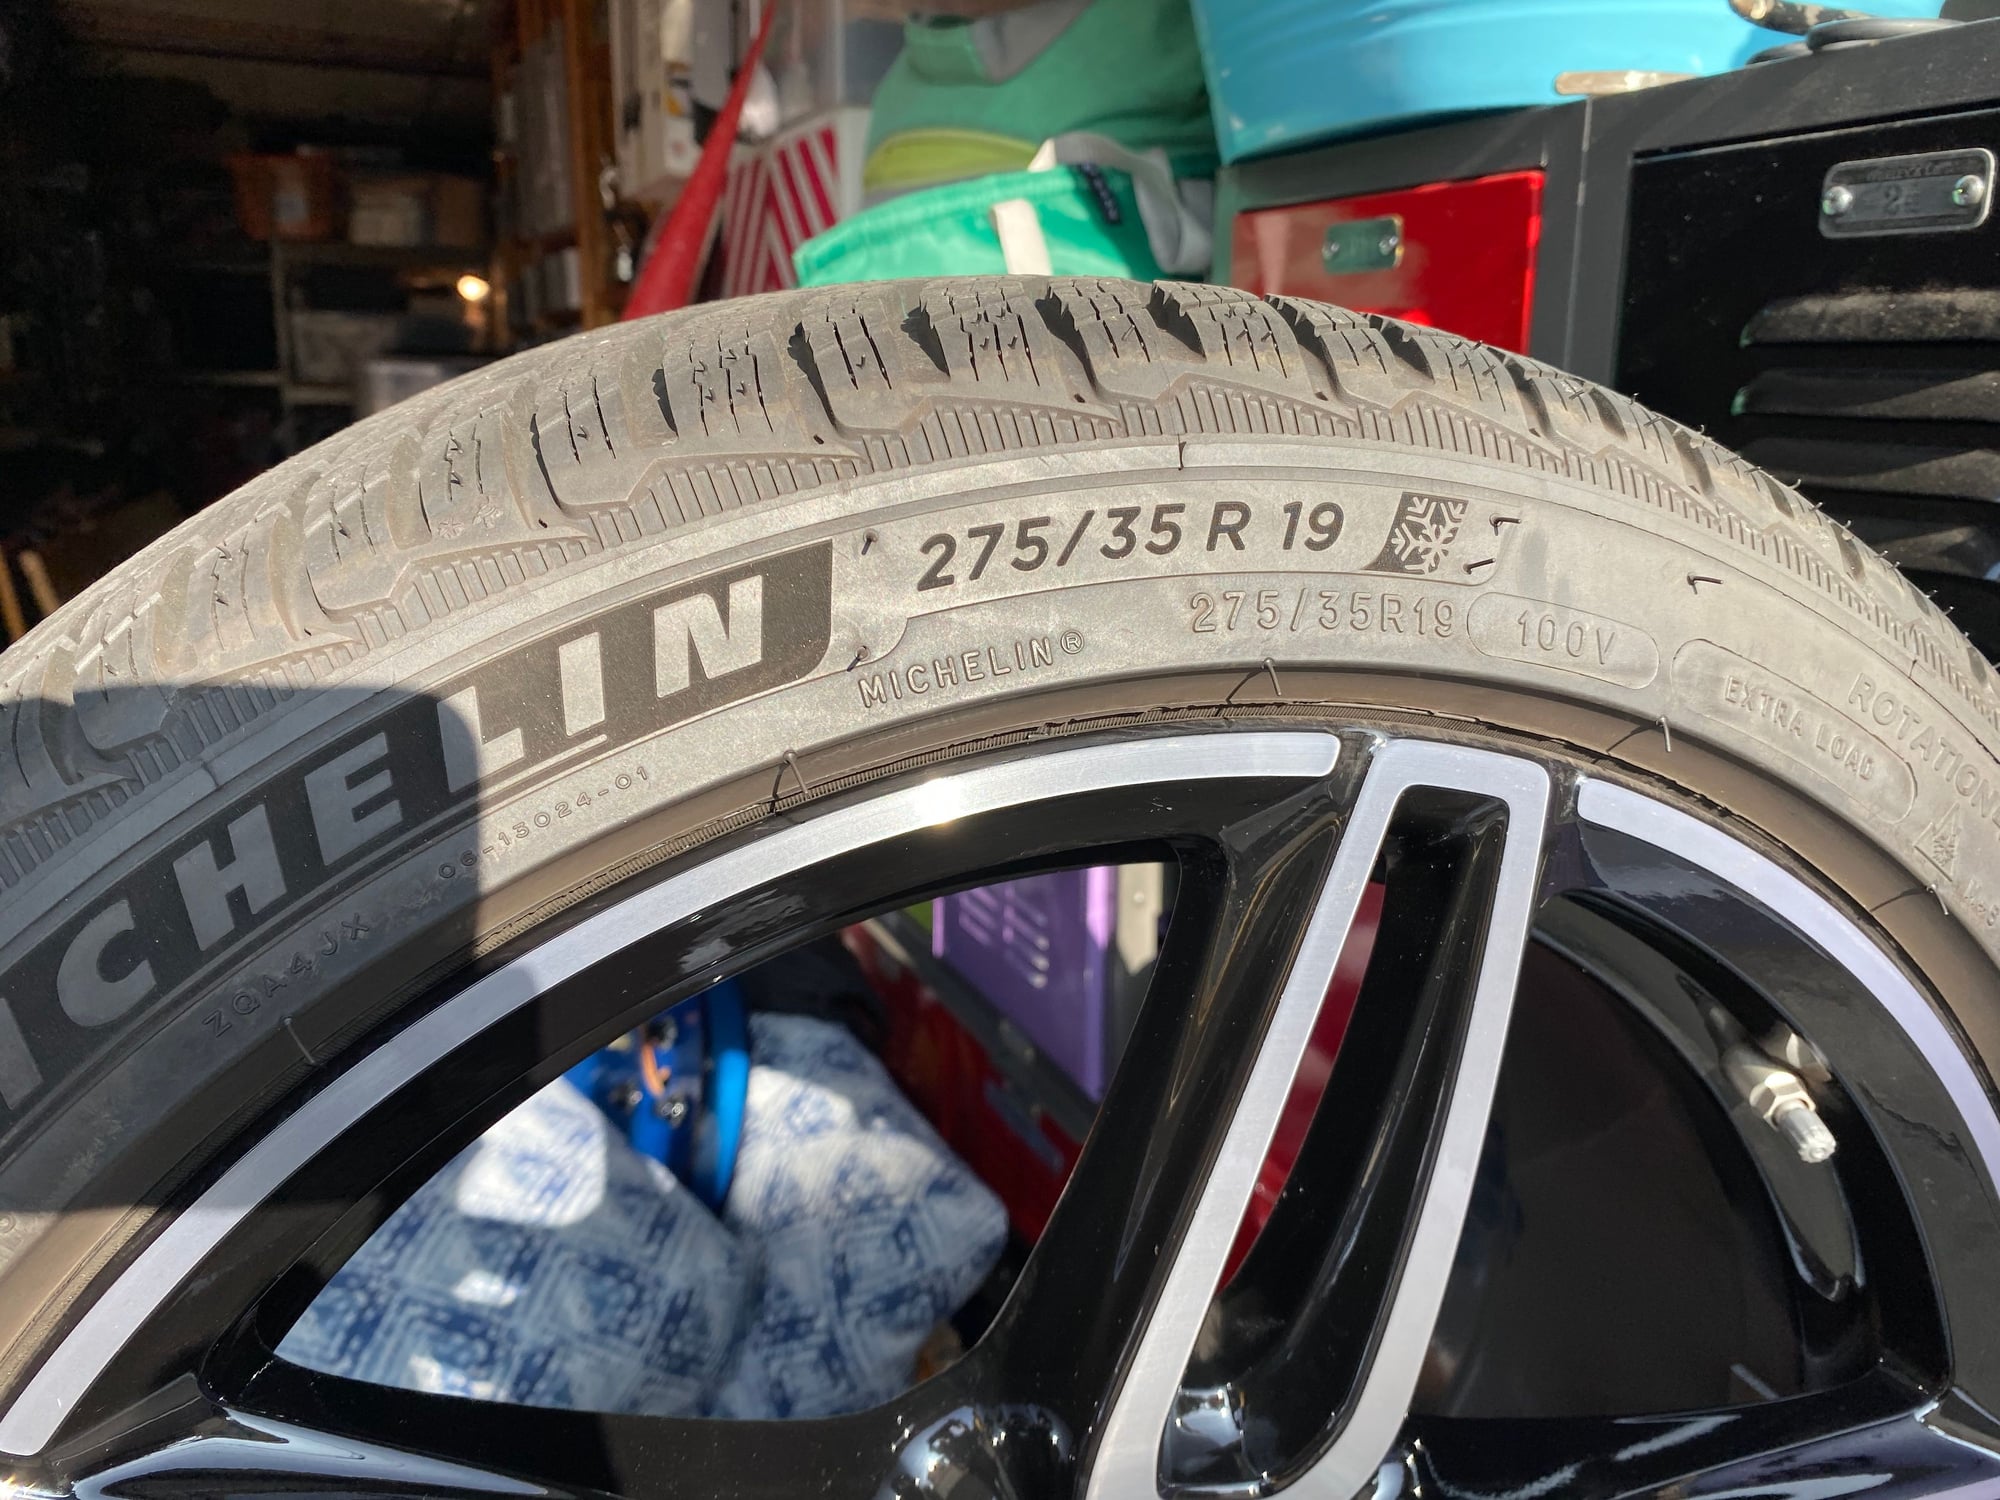 Wheels and Tires/Axles - 19 inch AMG rims & Michelin all season tires from w213 e63s - New - Santa Monica, CA 90403, United States